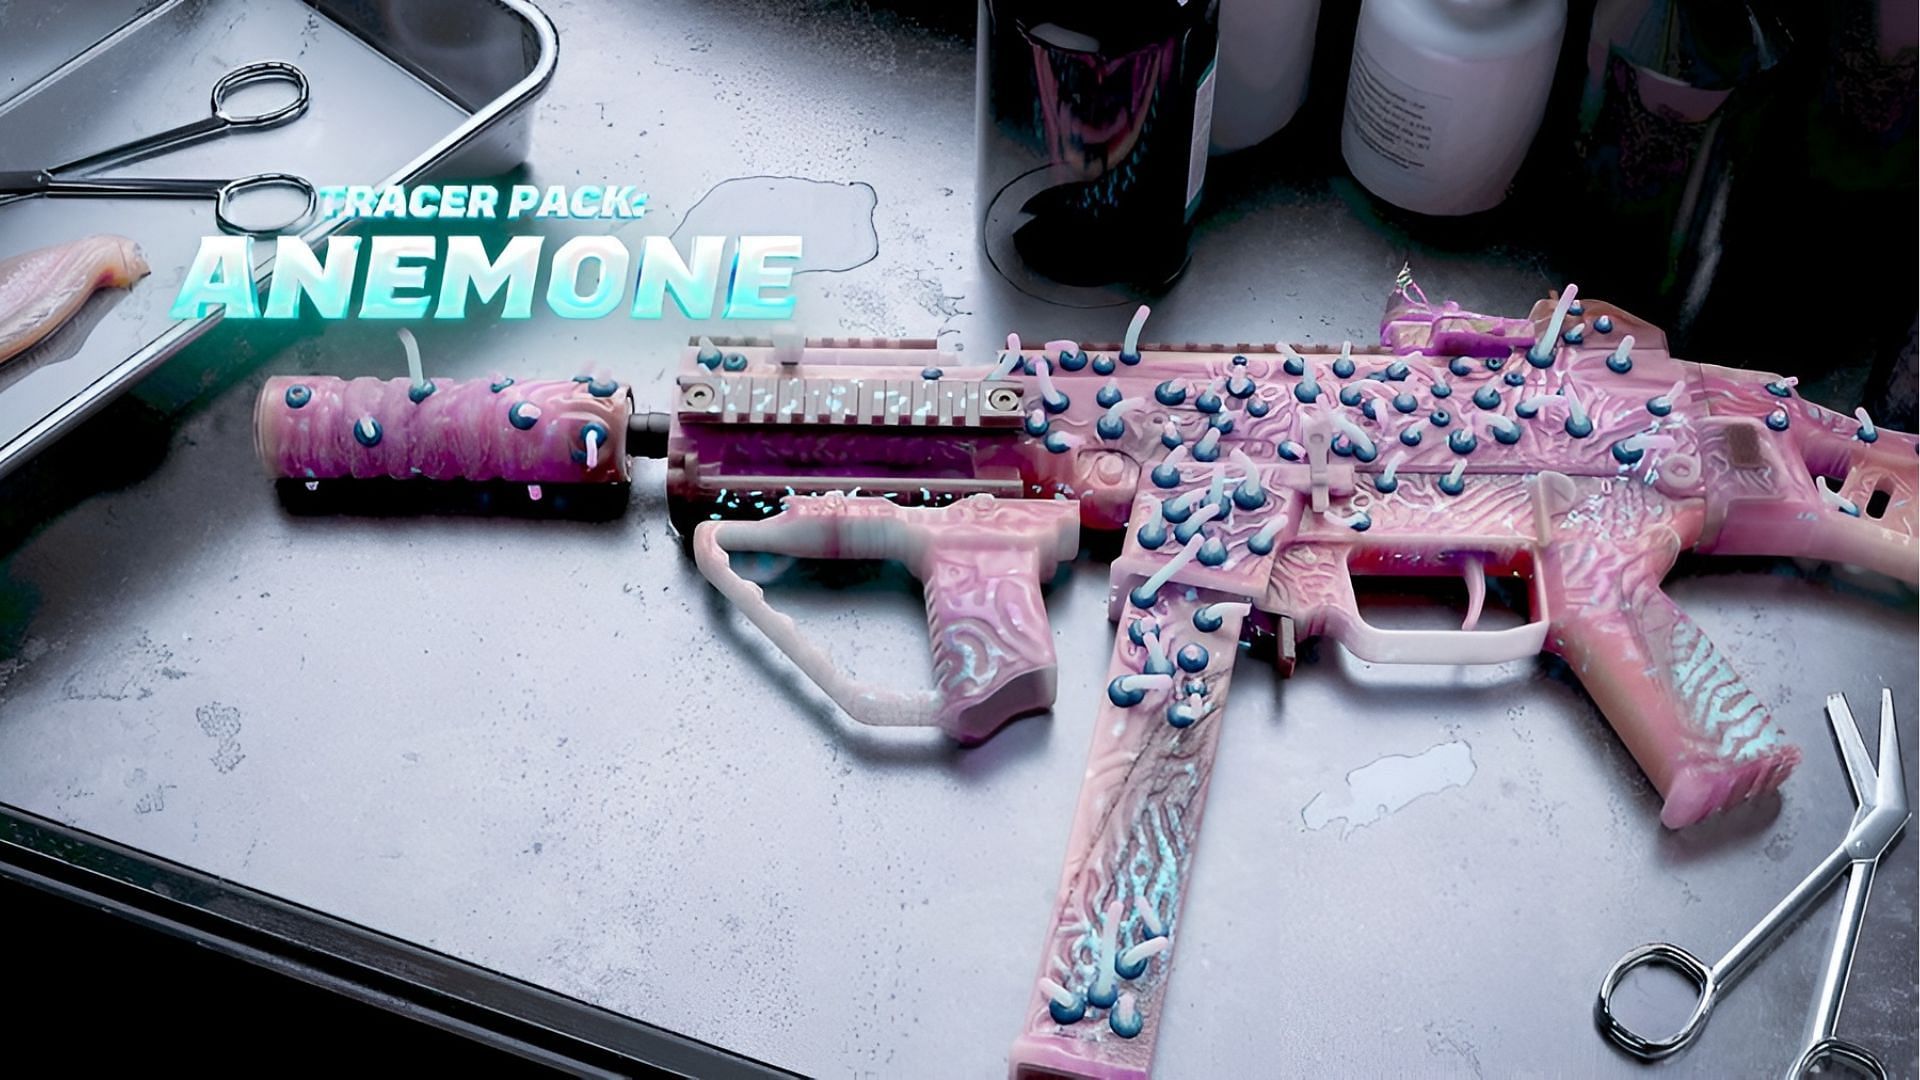 Anemone Tracer Pack in MW3 and Warzone